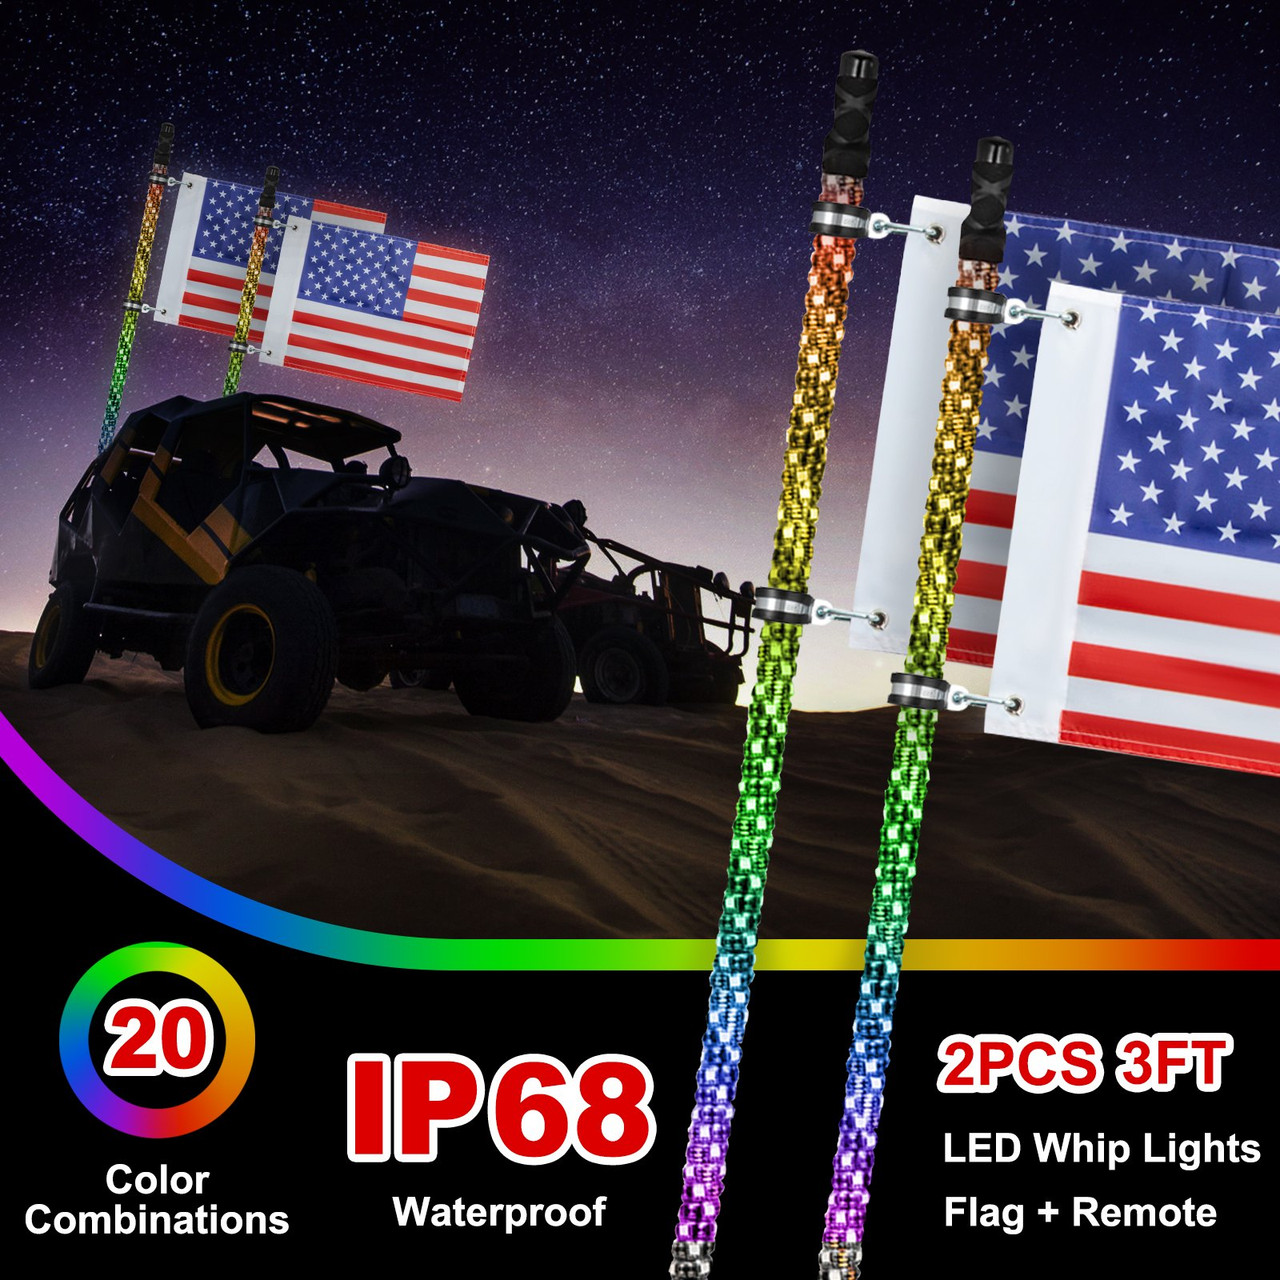 2PC 3FT 360°Spiral LED Whip Lights RGB Color Lighted Whips for UTV ATV 21 Modes,20 Colors,5 Levels,Weatherproof,Off-Road Whip RF Wireless Remote for UTV ATV Polaris Accessories RZR